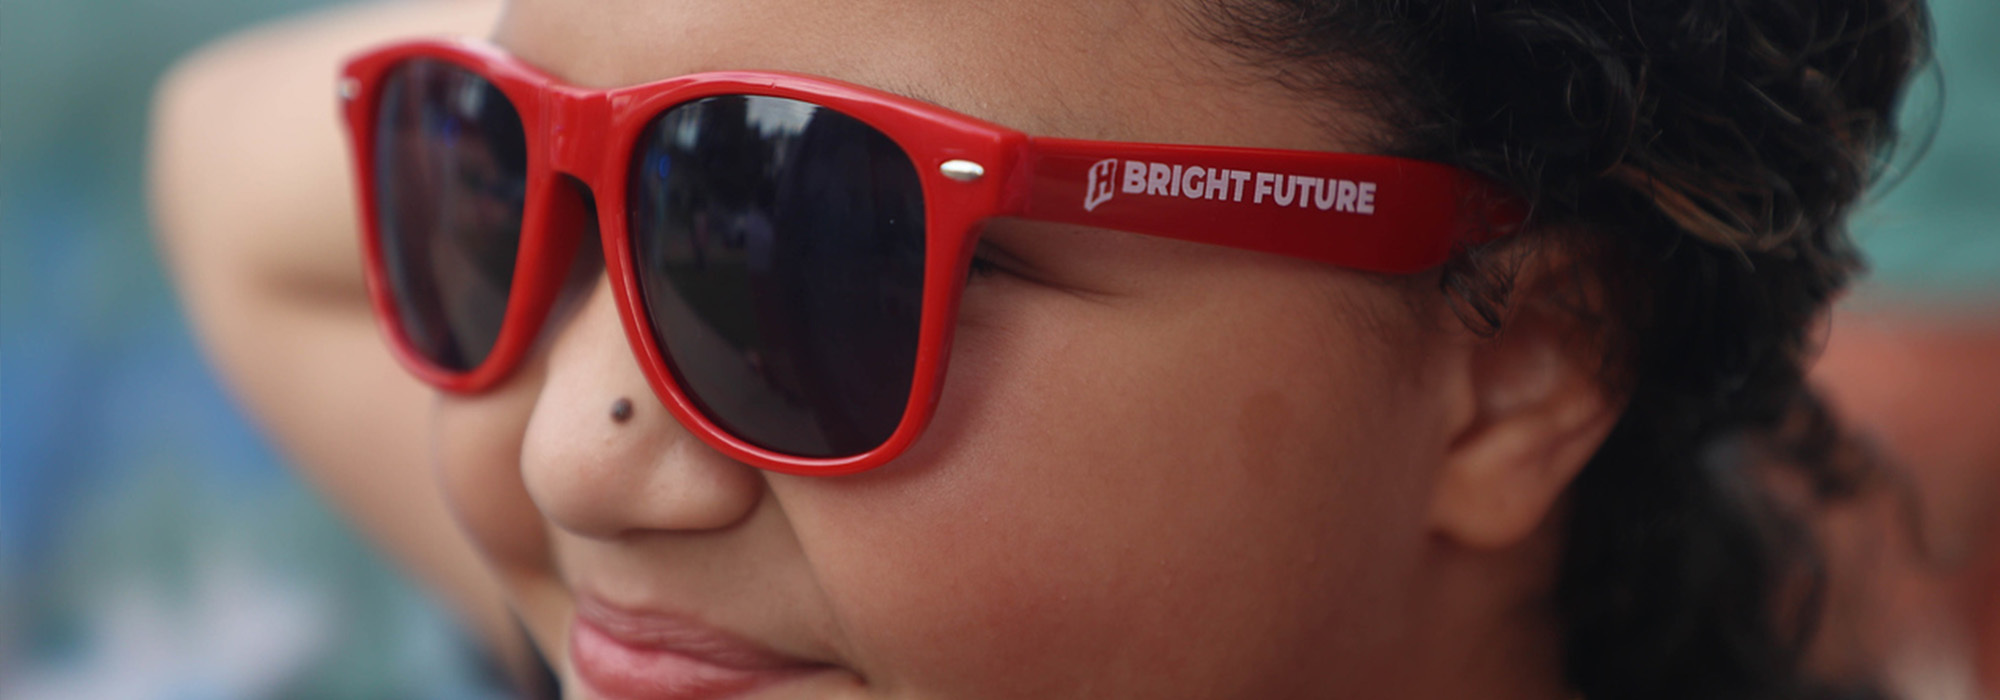 Girl wearing Sunglasses with Bright Future